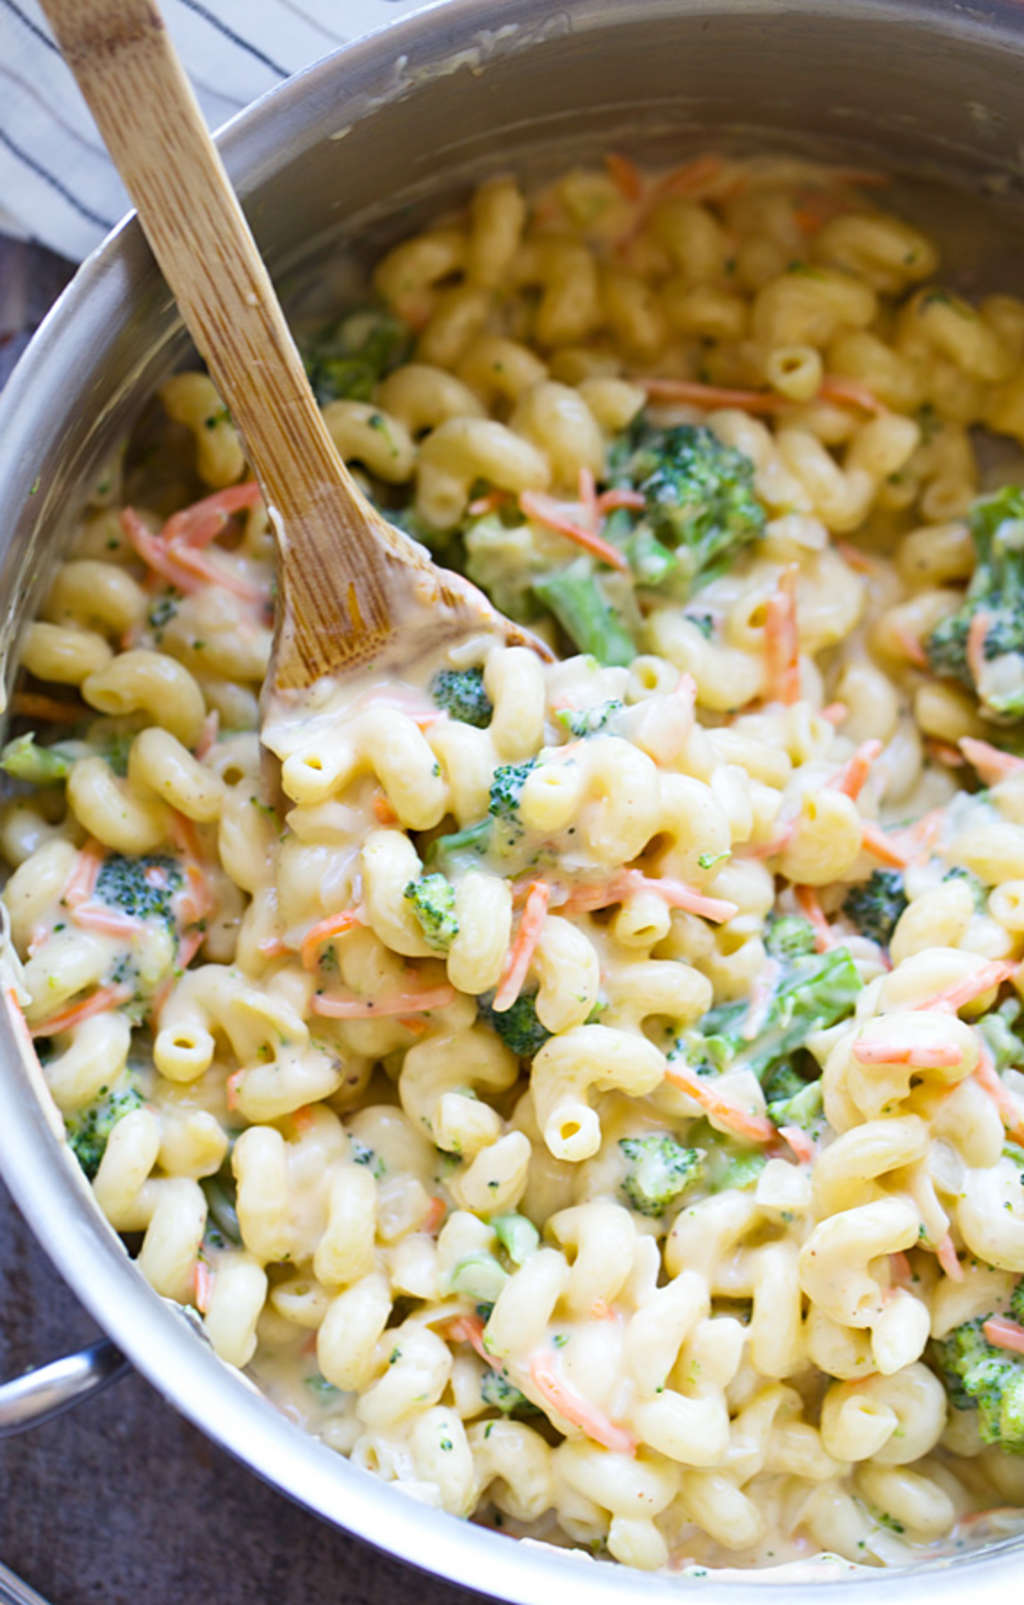 This Mac & Cheese Was Inspired by Broccoli-Cheddar Soup ...